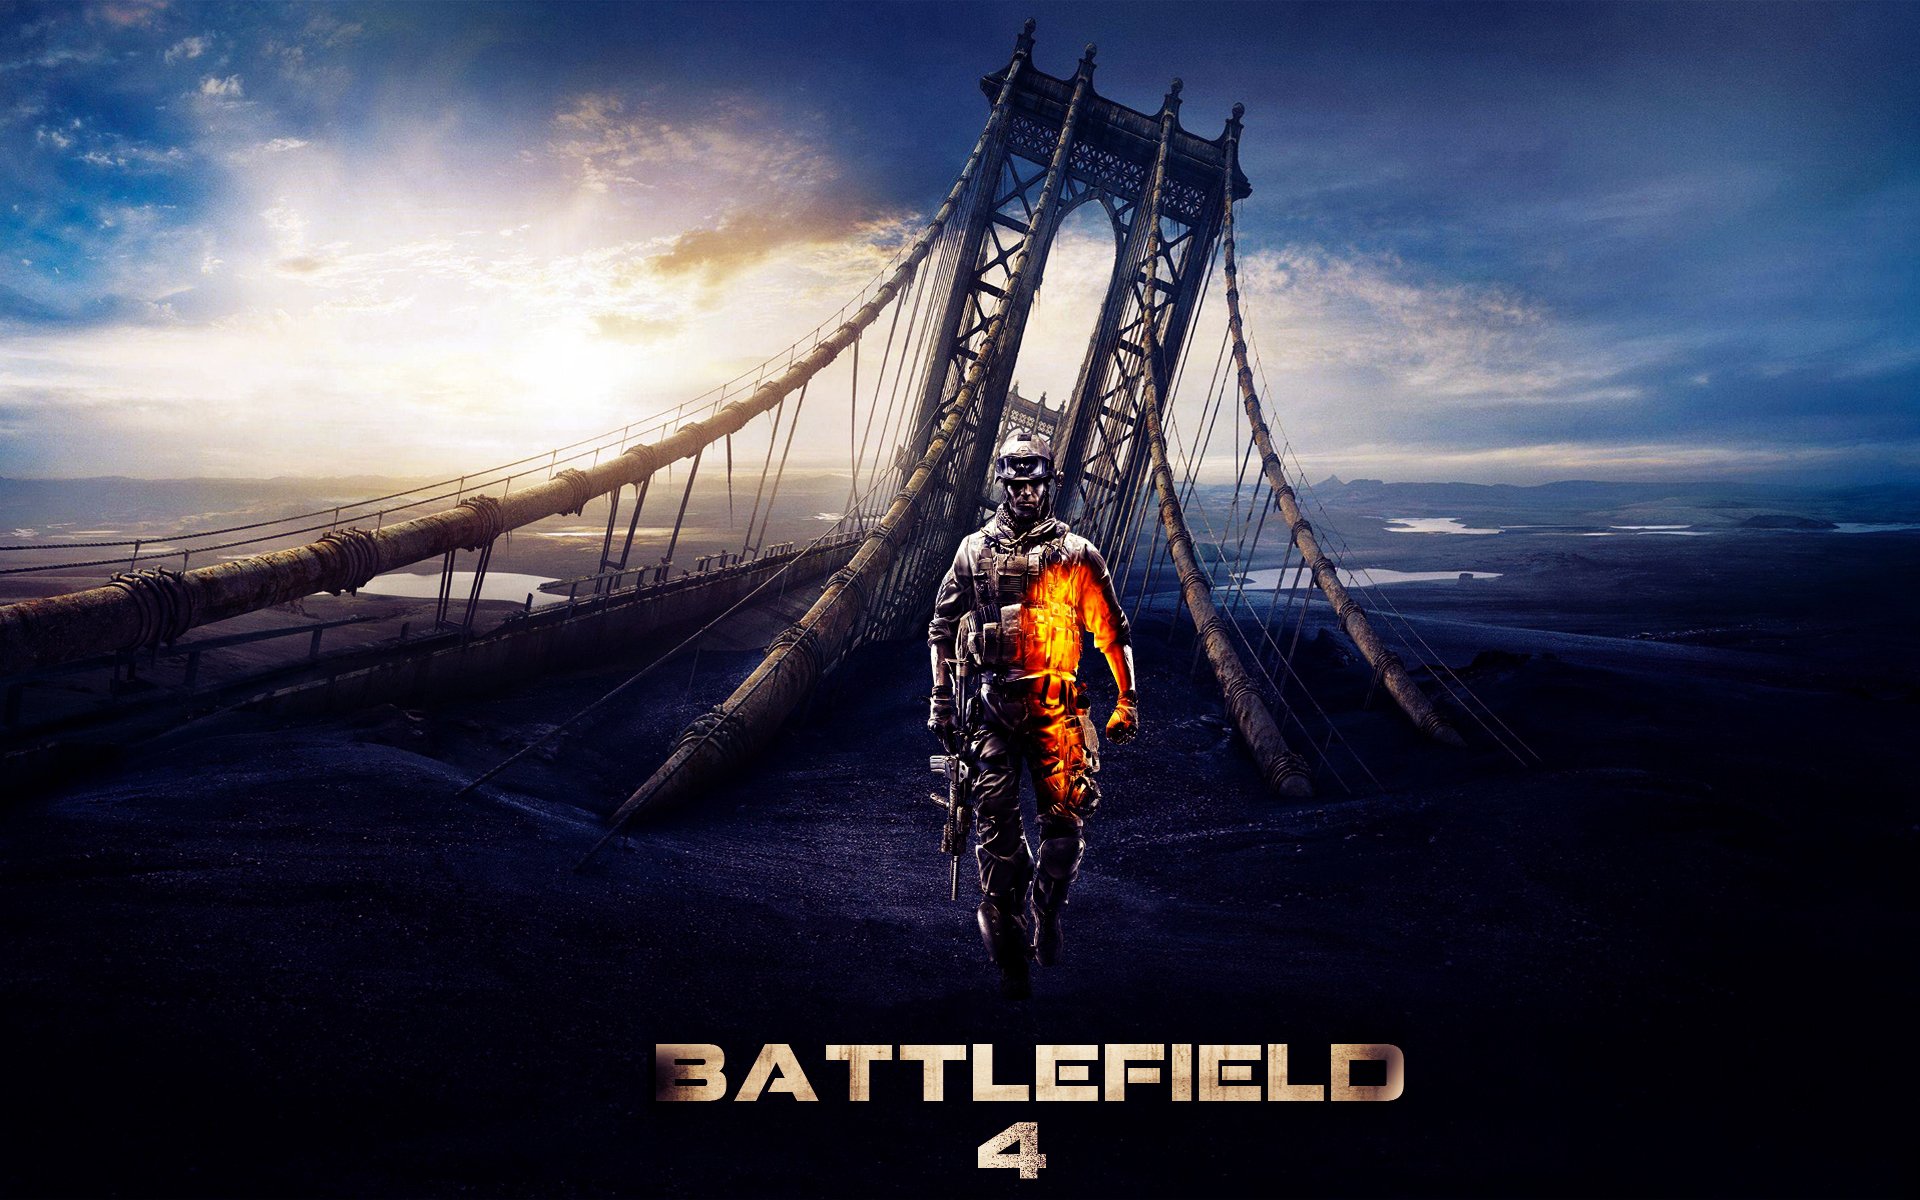  By Stephen Comments Off on Battlefield HD Wallpapers